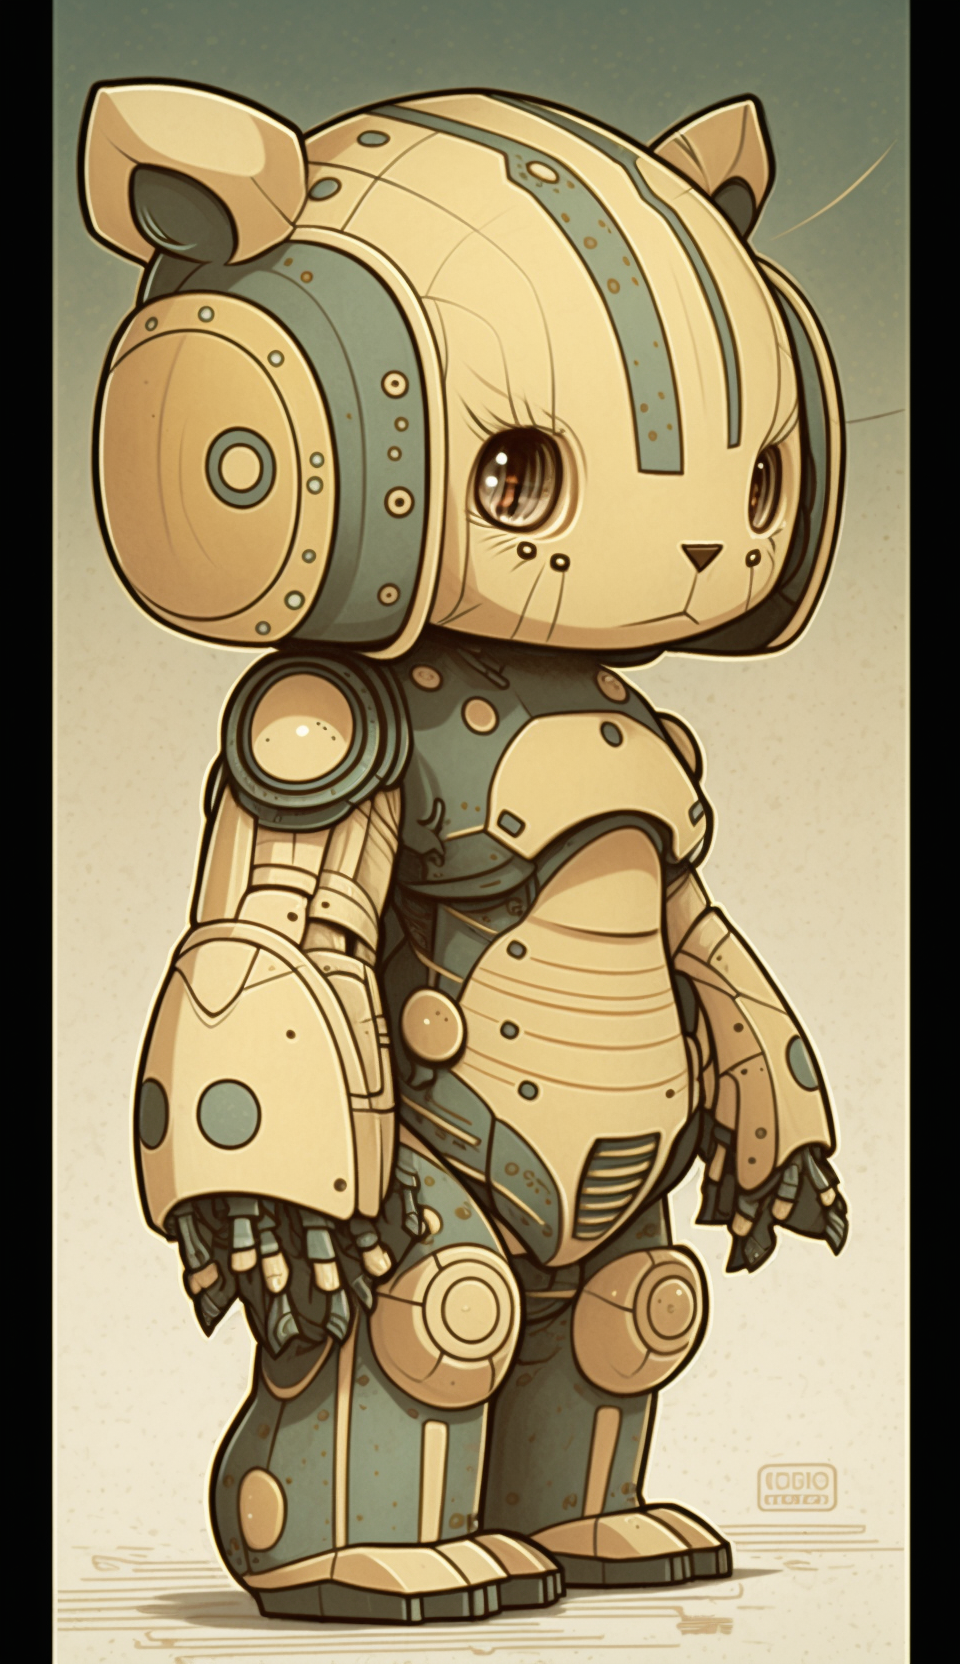 soupcan13_robot_bear_mech_in_the_style_of_Audrey_Kawasaki_181af025-7bac-4f8a-879a-a68b0e19b4fe.png